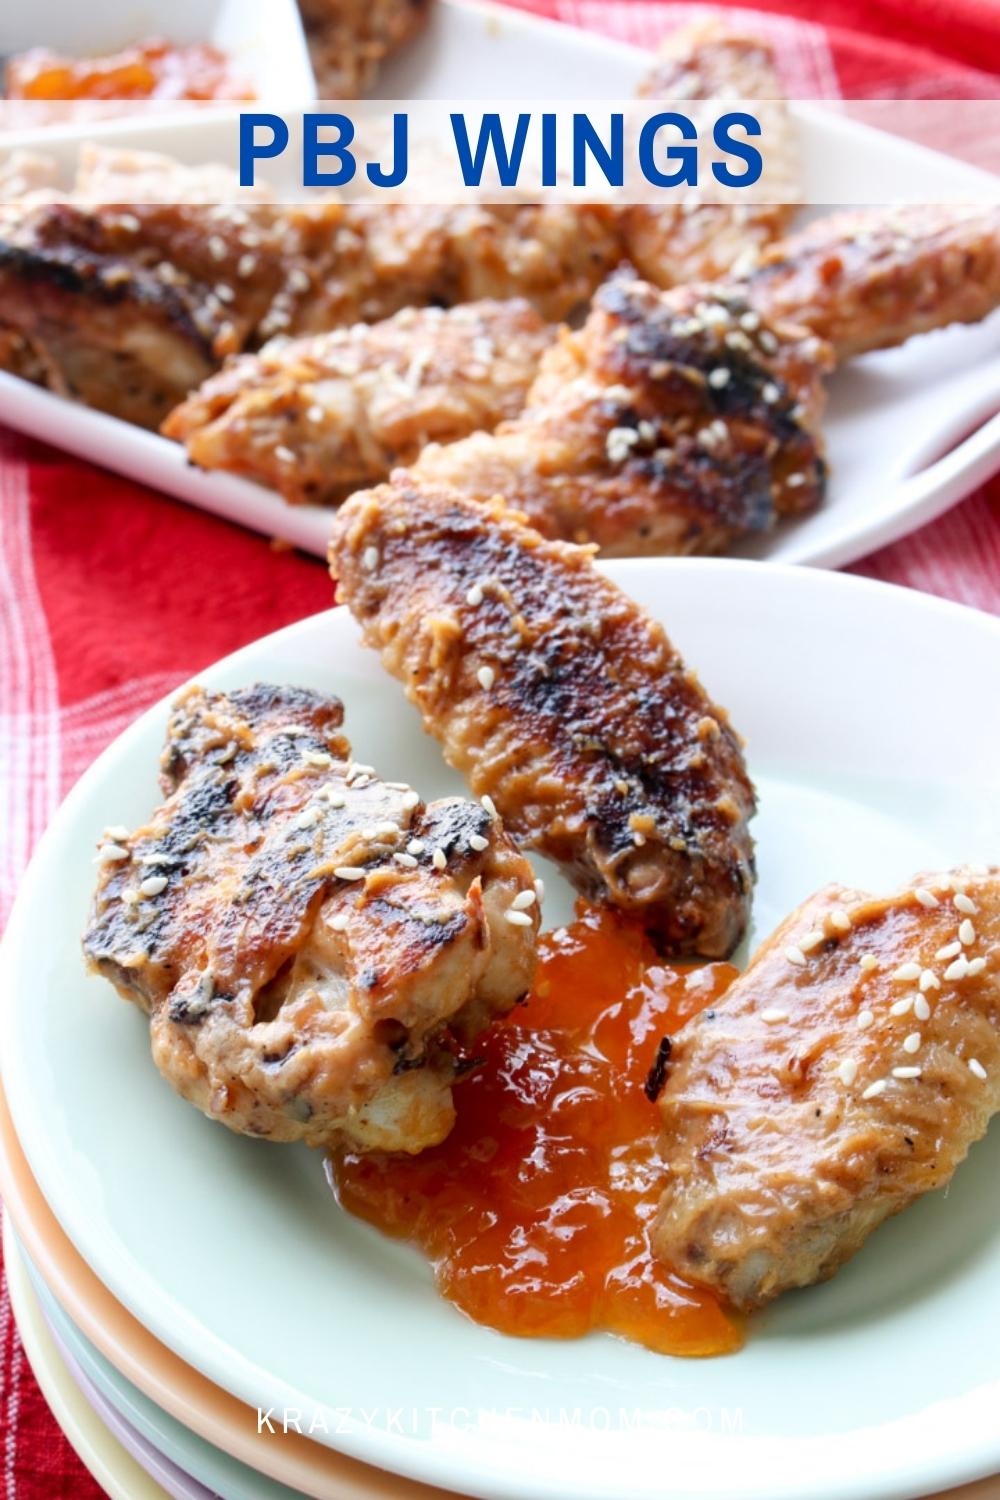 These spicy peanut butter and jelly wings will change the way you think about grilled wings. These are sweet and tangy with a little heat. via @krazykitchenmom